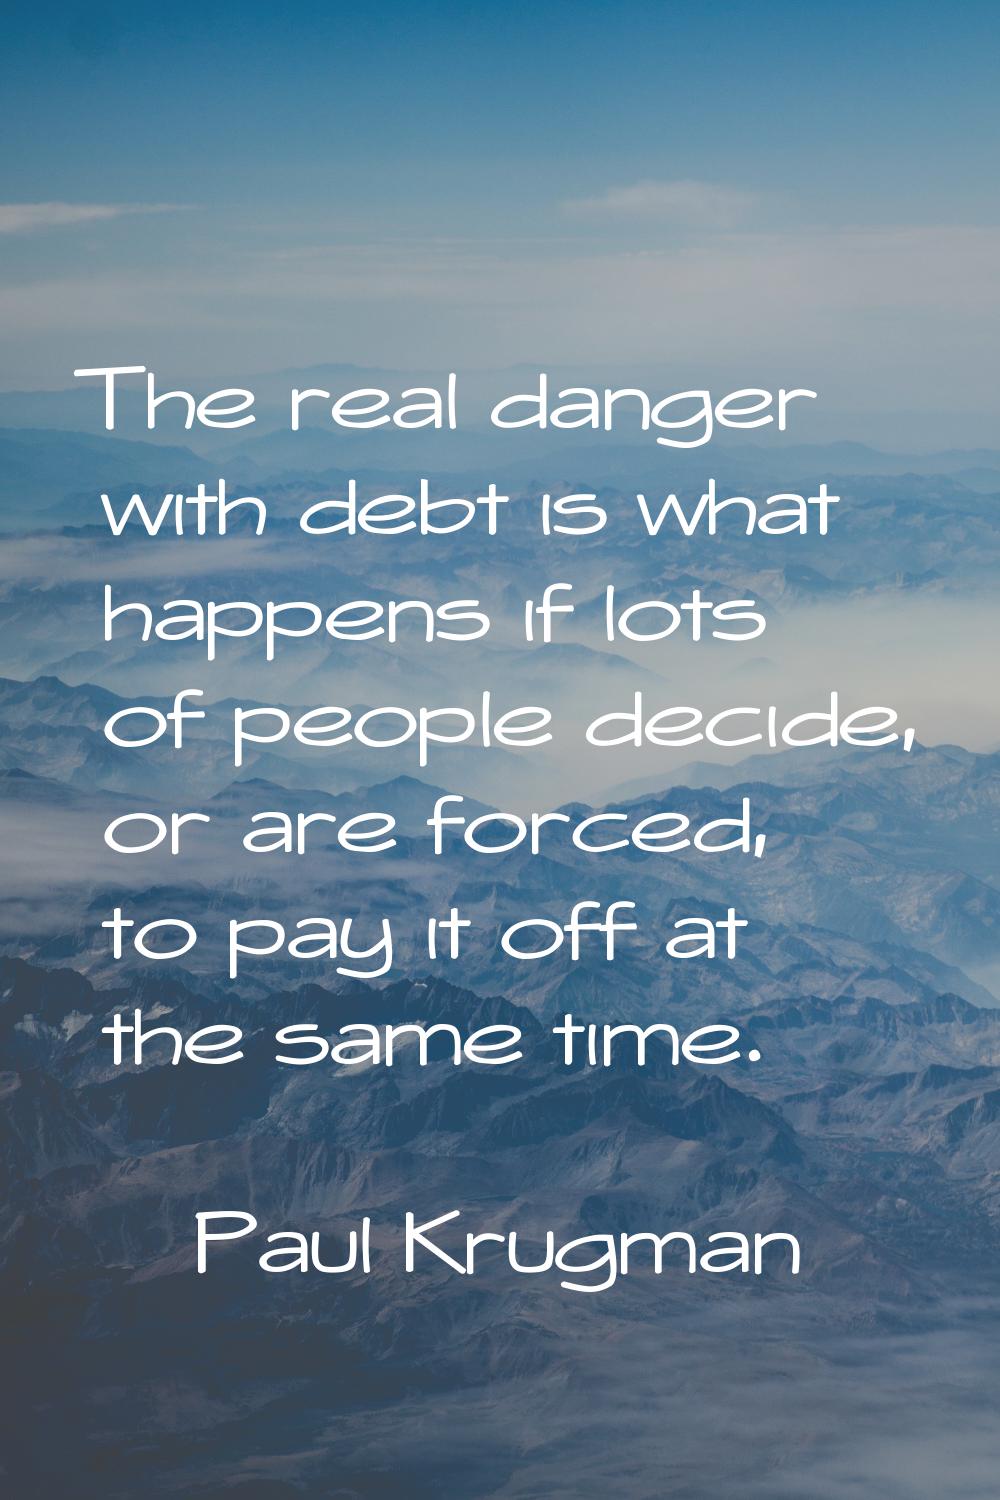 The real danger with debt is what happens if lots of people decide, or are forced, to pay it off at